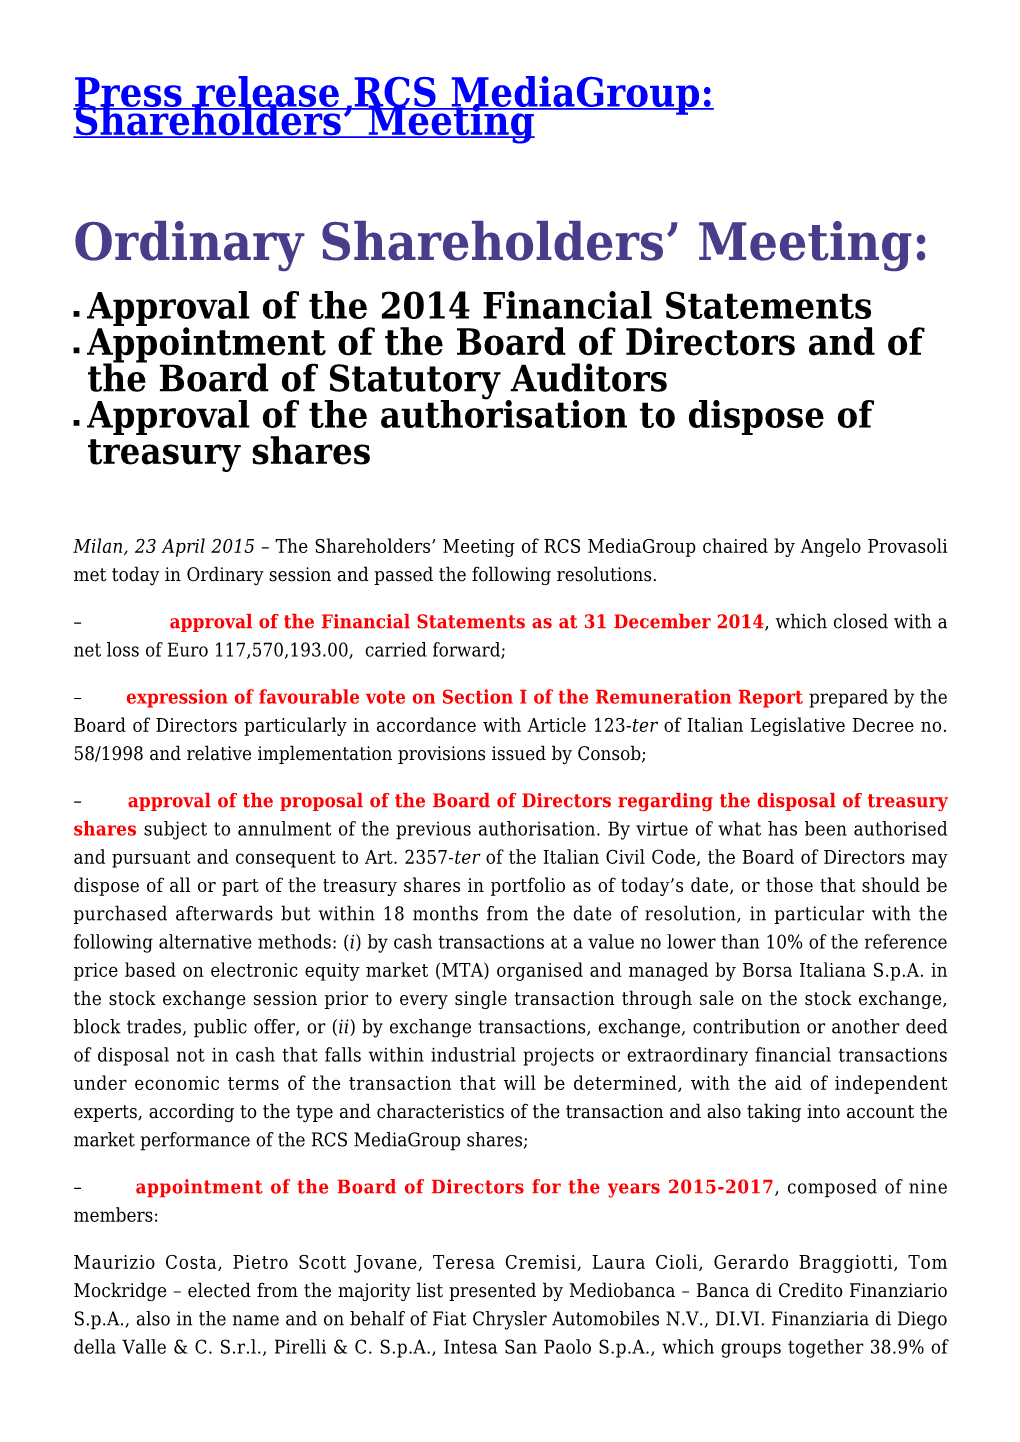 Press Release RCS Mediagroup: Shareholders' Meeting